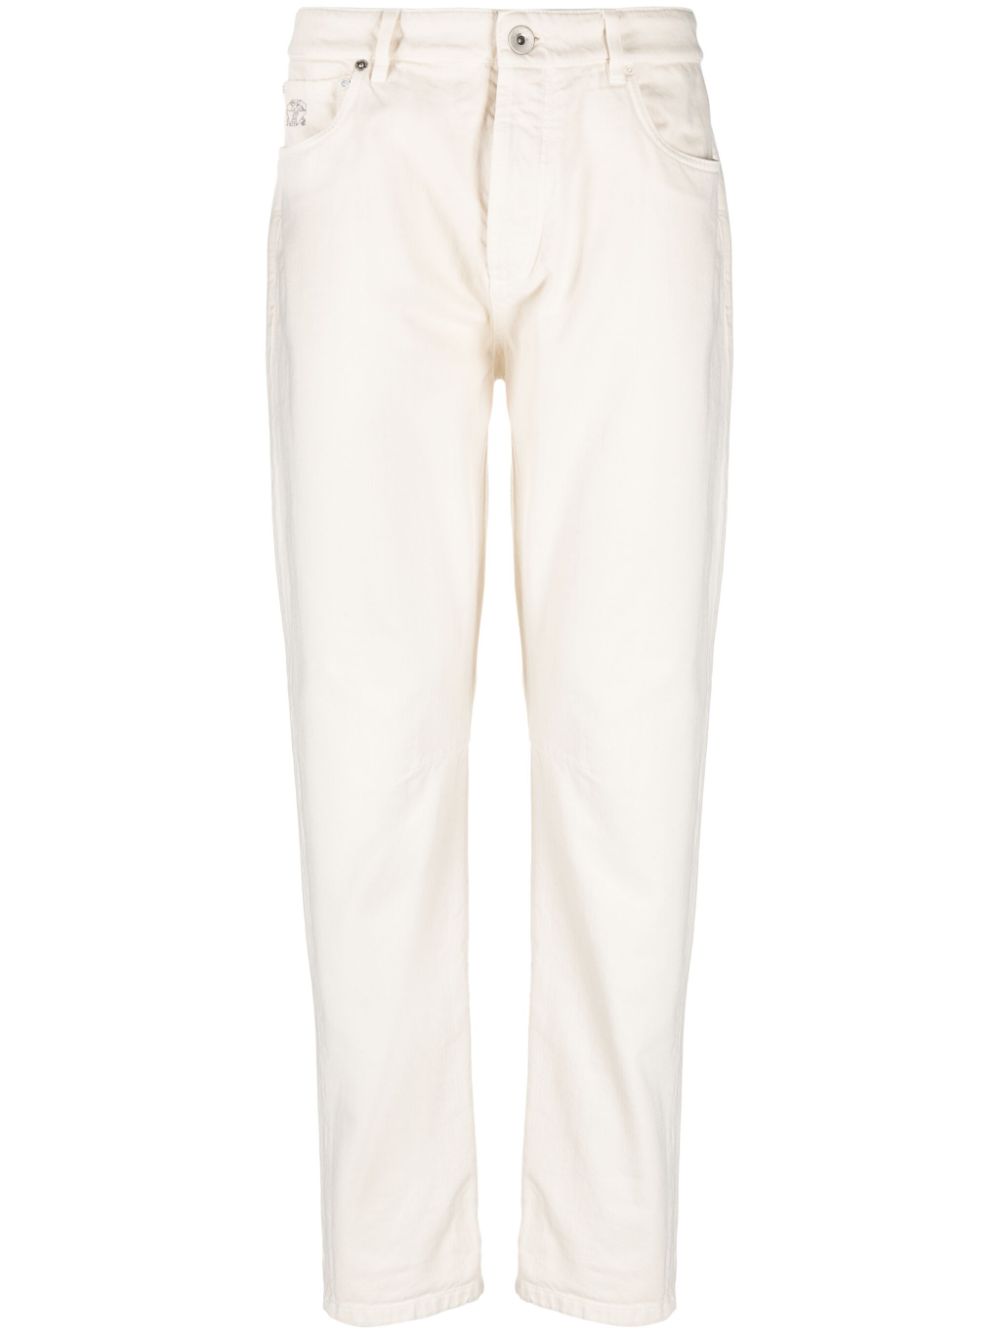 BRUNELLO CUCINELLI Men's Ivory White Cotton Leisure Trousers with Embroidered Logo and Straight Leg